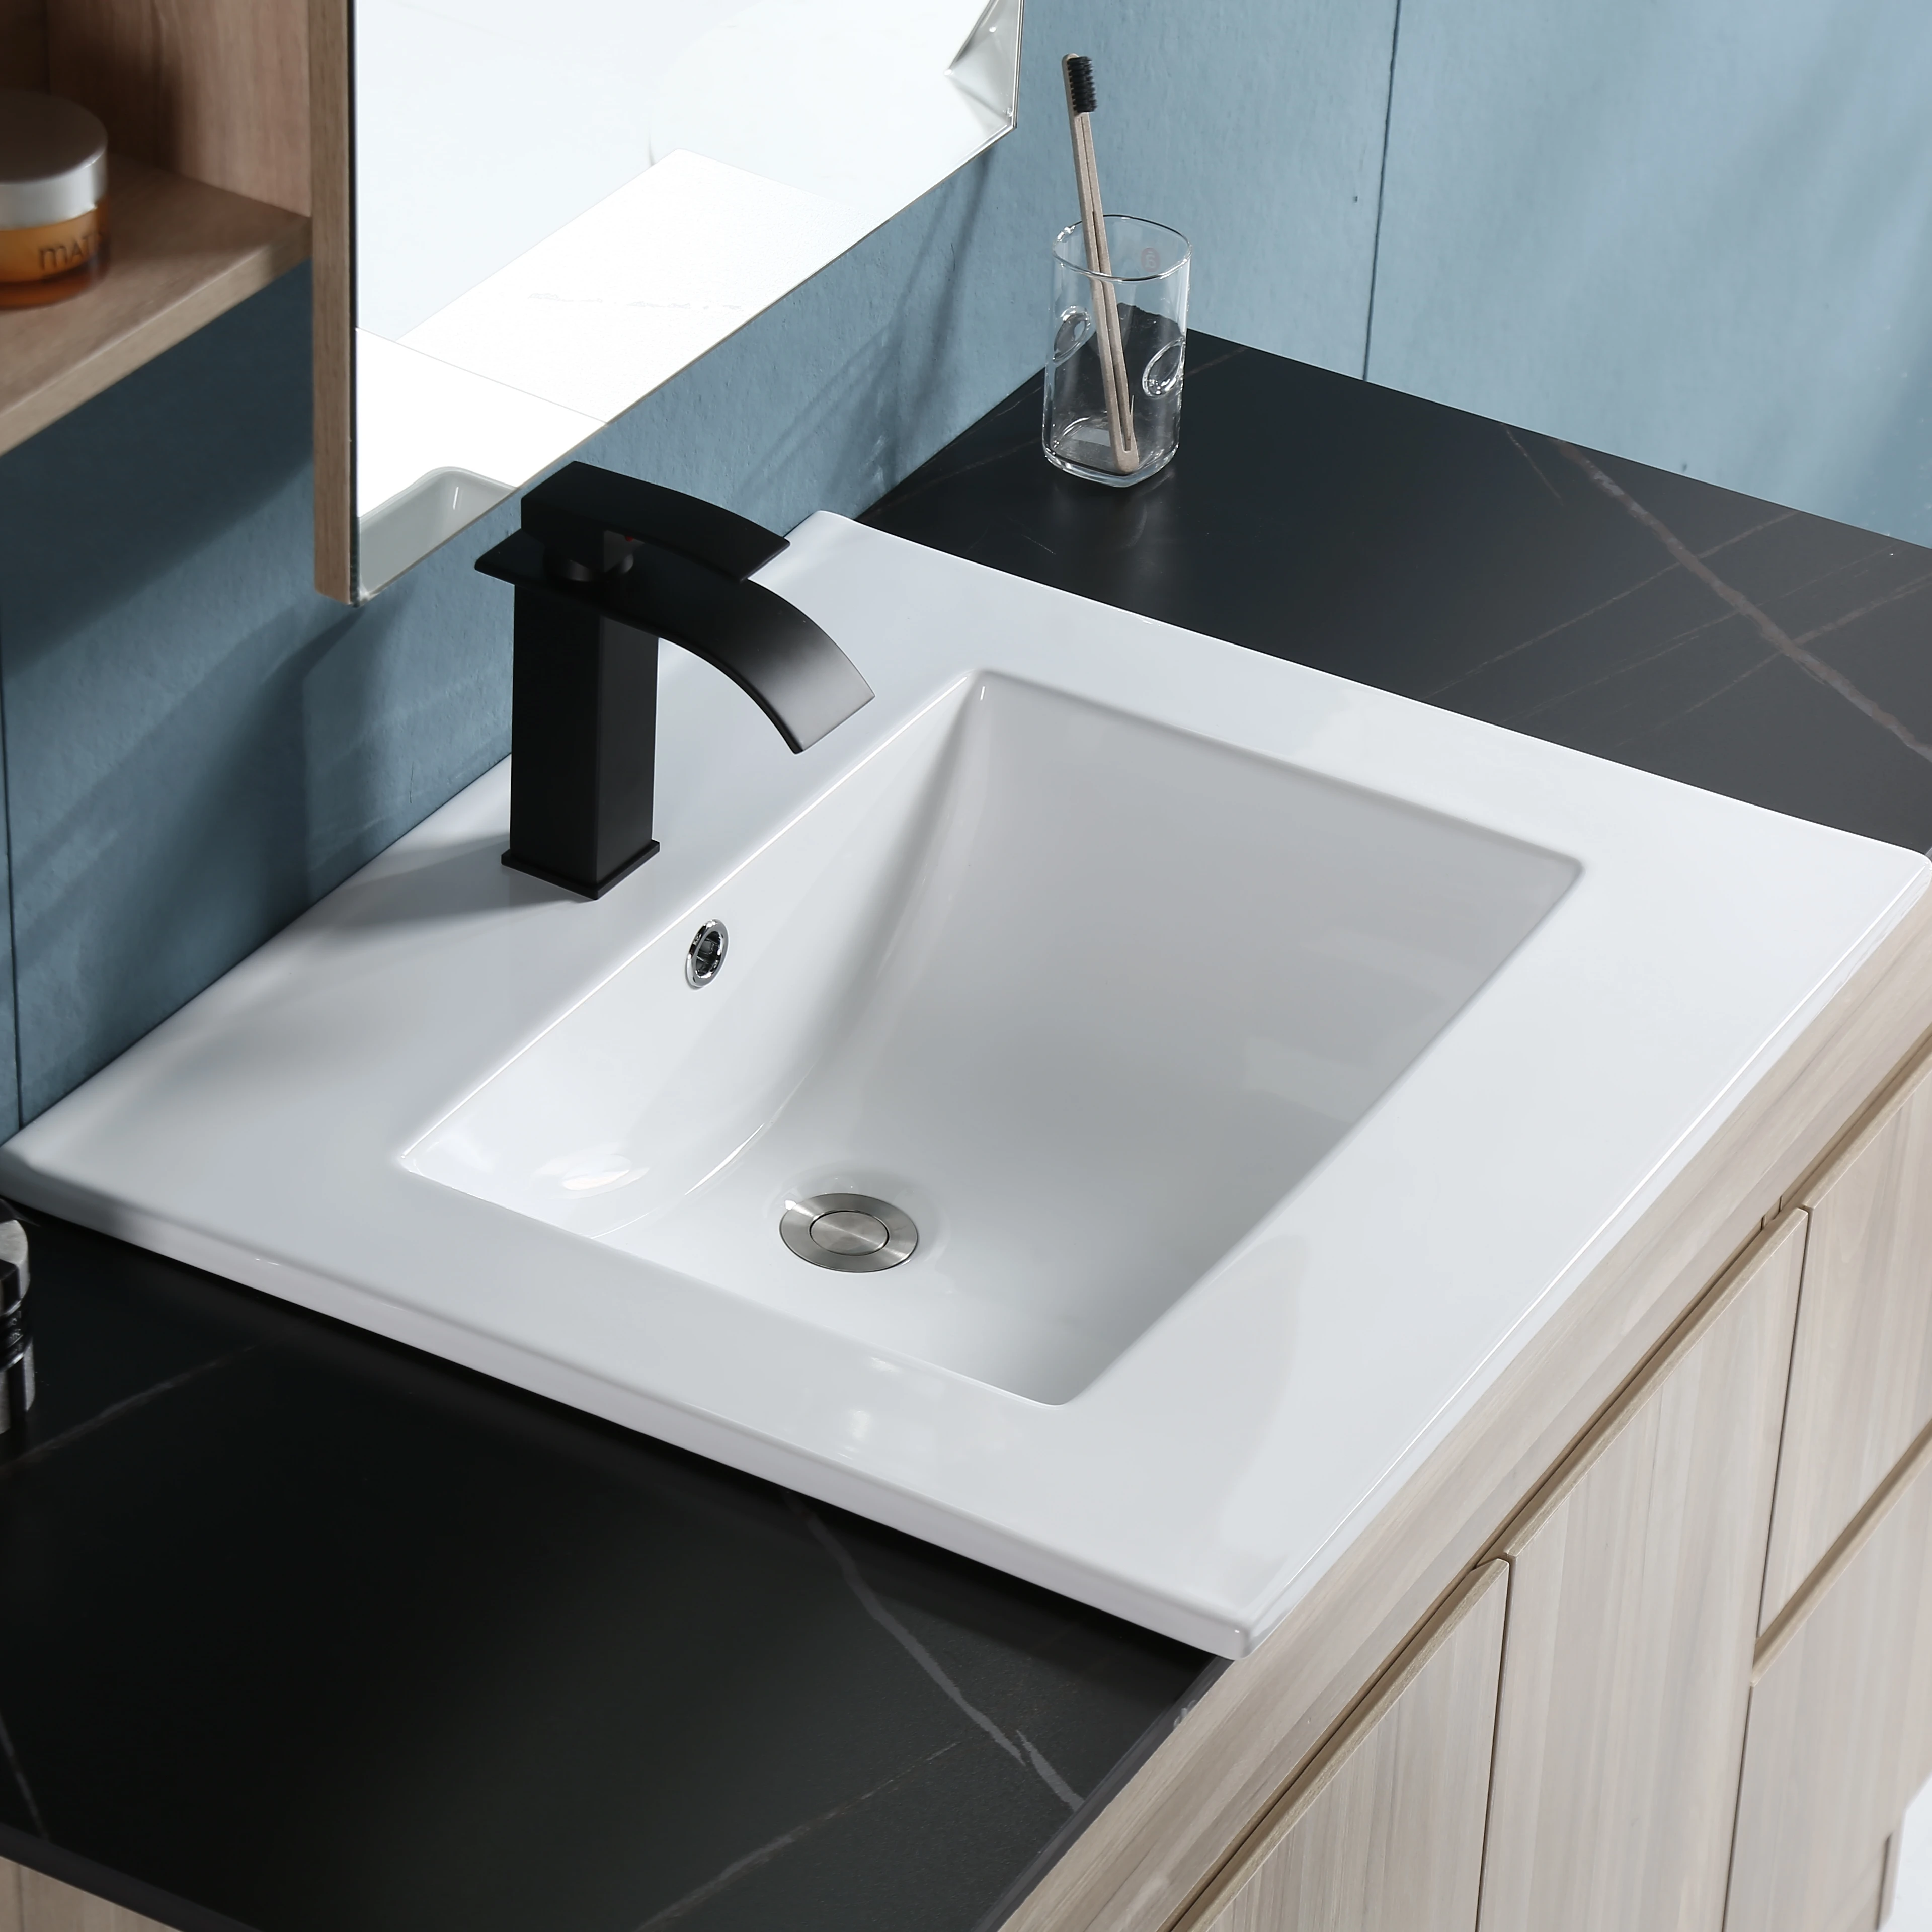 E5663 22 inch Width Hot new products The USA CUPC Certificate bathroom sink ceramic cabinet basin from China